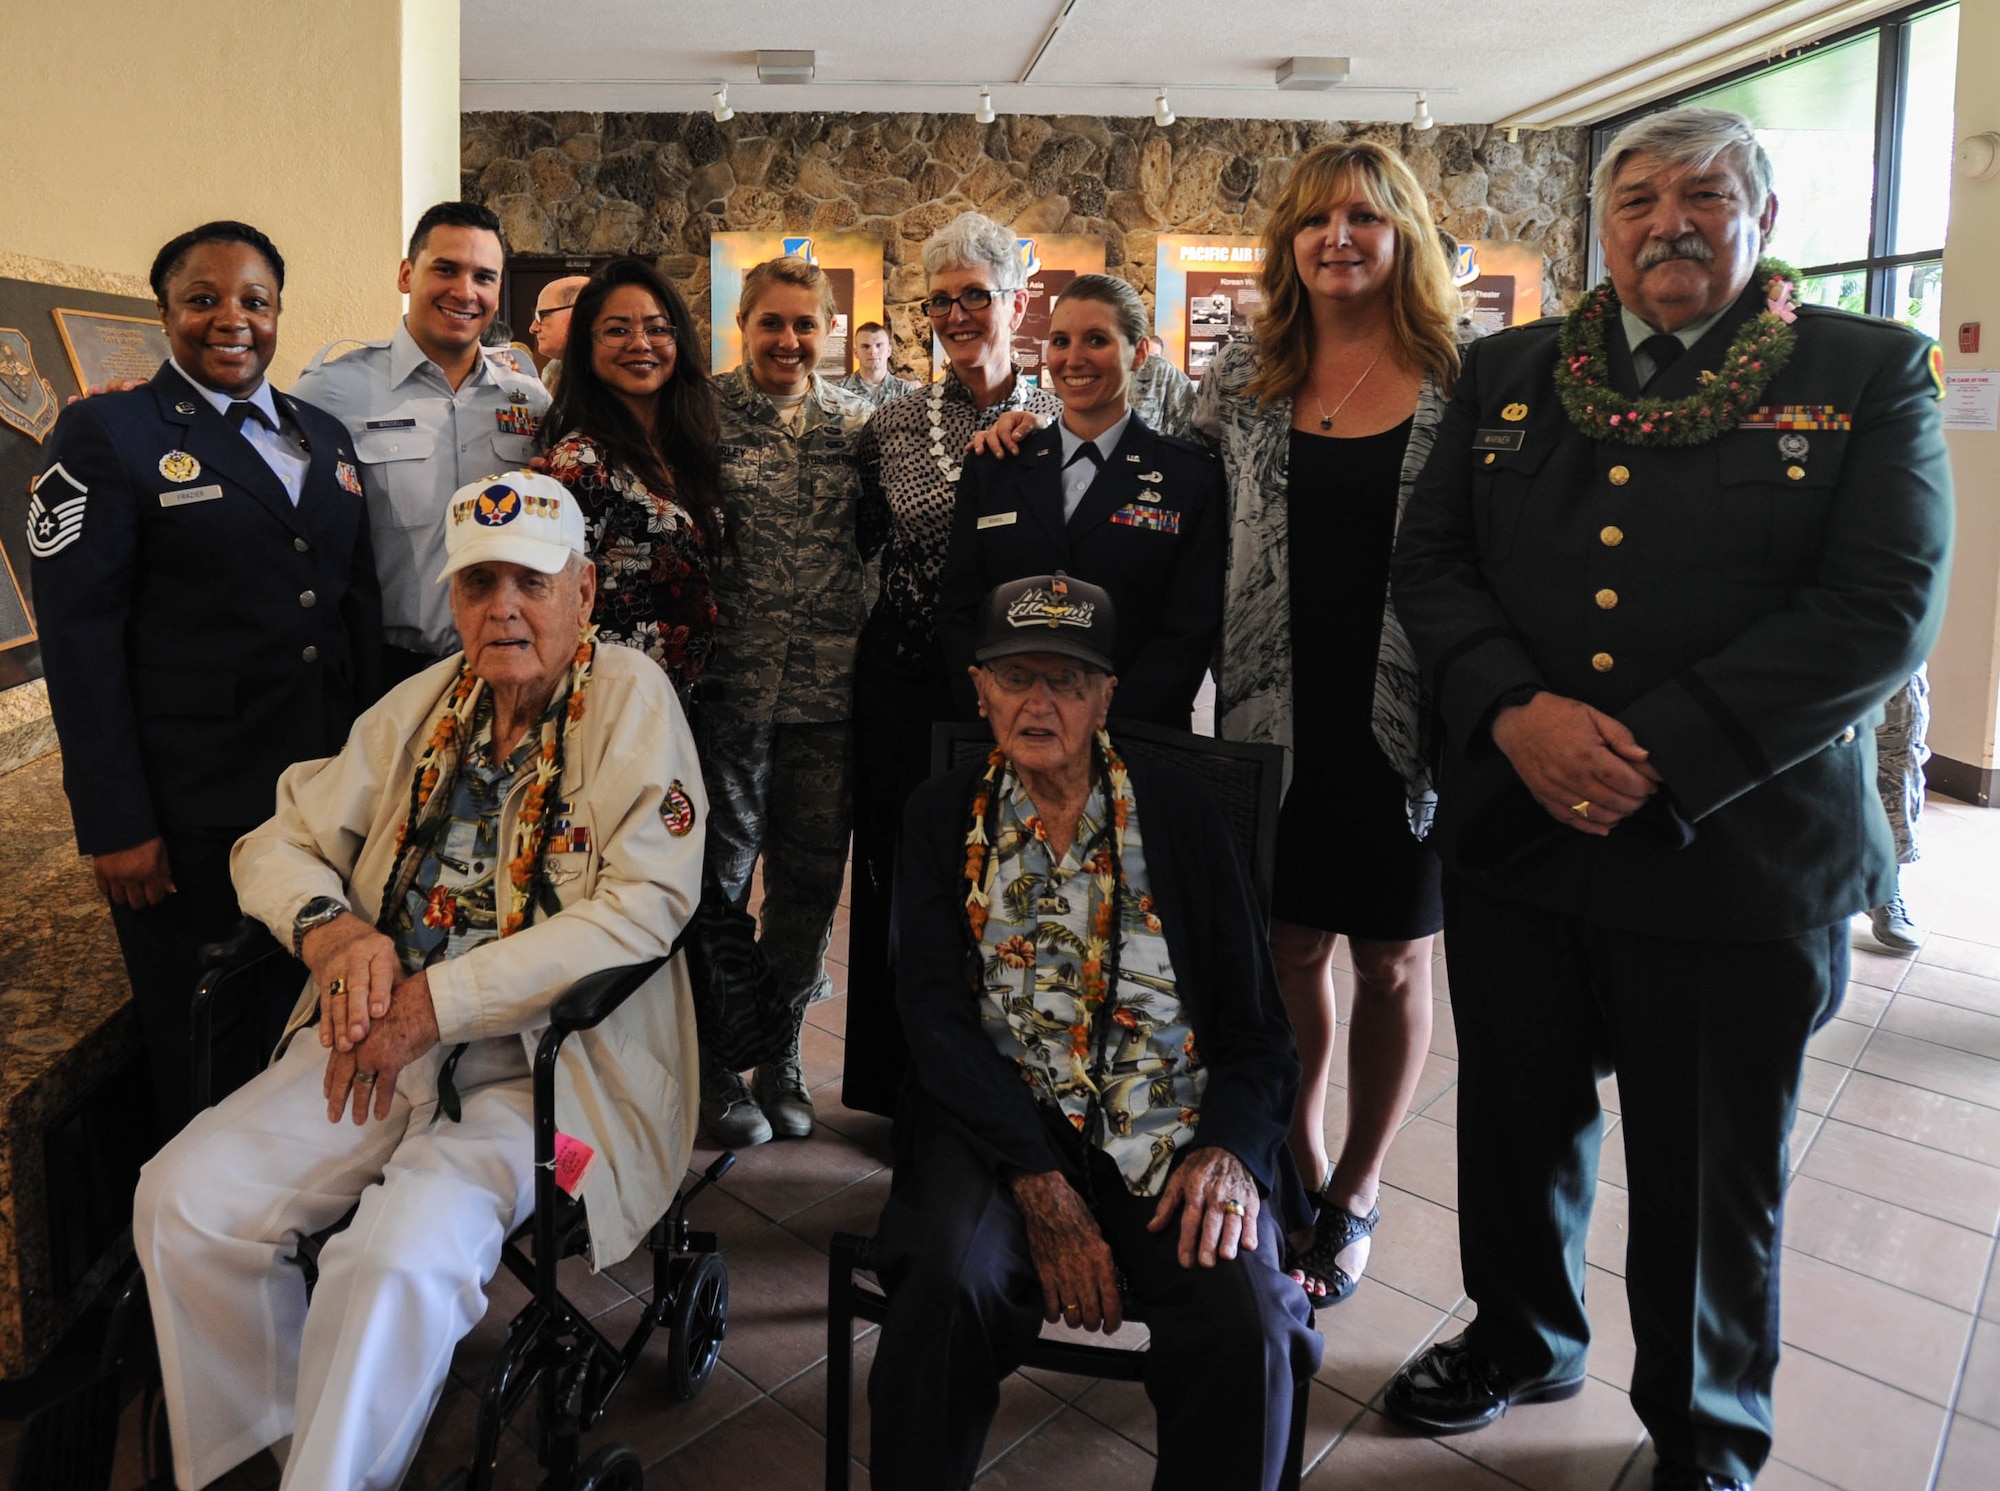 U.S. Air Force Airmen from Pacific Air Forces take a photo with (front left to right) former U.S. Army Air Forces Durward Swanson and retired U.S. Air Force Col. Andrew Kowalski, Hickam Field attack survivors, and retired U.S. Army Maj. Wynn Warner, whose father raised the Hickam Flag before the attacks on Pearl Harbor and Hickam, after a ceremony, Dec. 7, 2015, Joint Base Pearl Harbor-Hickam, Hawaii. The ceremony was held to unveil the new flag case "Old Glory" is to be displayed in. (U.S. Air Force photo by Tech. Sgt. Amanda Dick/Released)